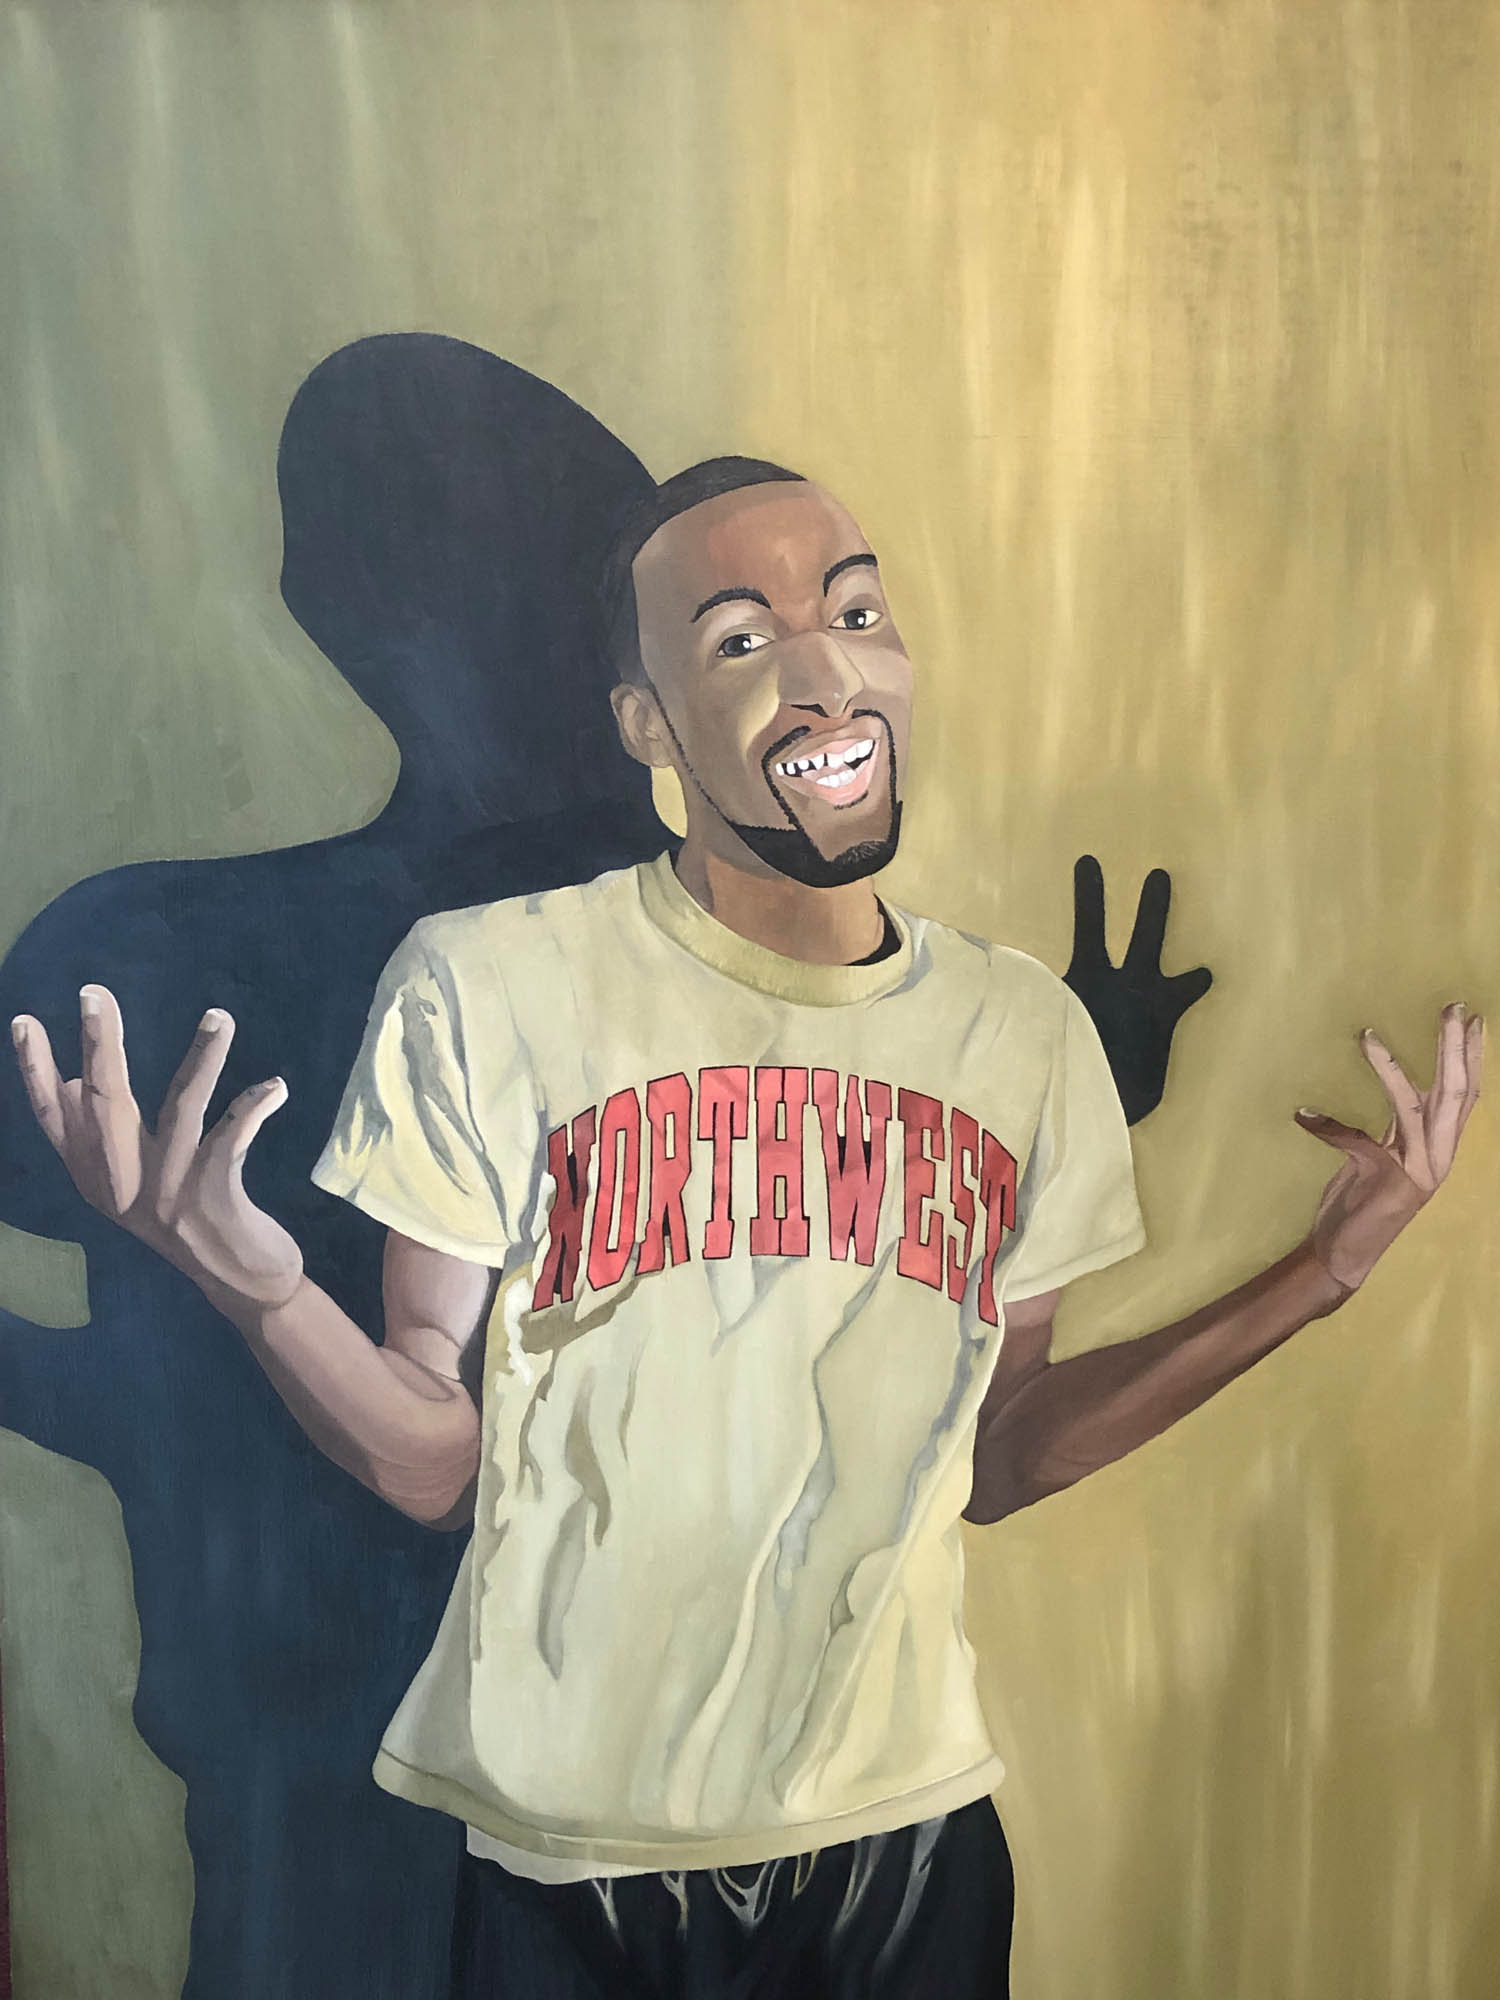 African American male friend emphasizing an emotion of happiness. Wearing a warm green colored shirt, with dark black shorts. Incorporating multiple areas of warm tone greens onto the skin of the face, neck, hands, and arms. Also, having a shade silhouette behind the male figure. Warm and cool tones of greens on the background to compliment both the figure and the emotion of happiness. Detailed and textural areas within the shirt, shorts, arms, face, and background.